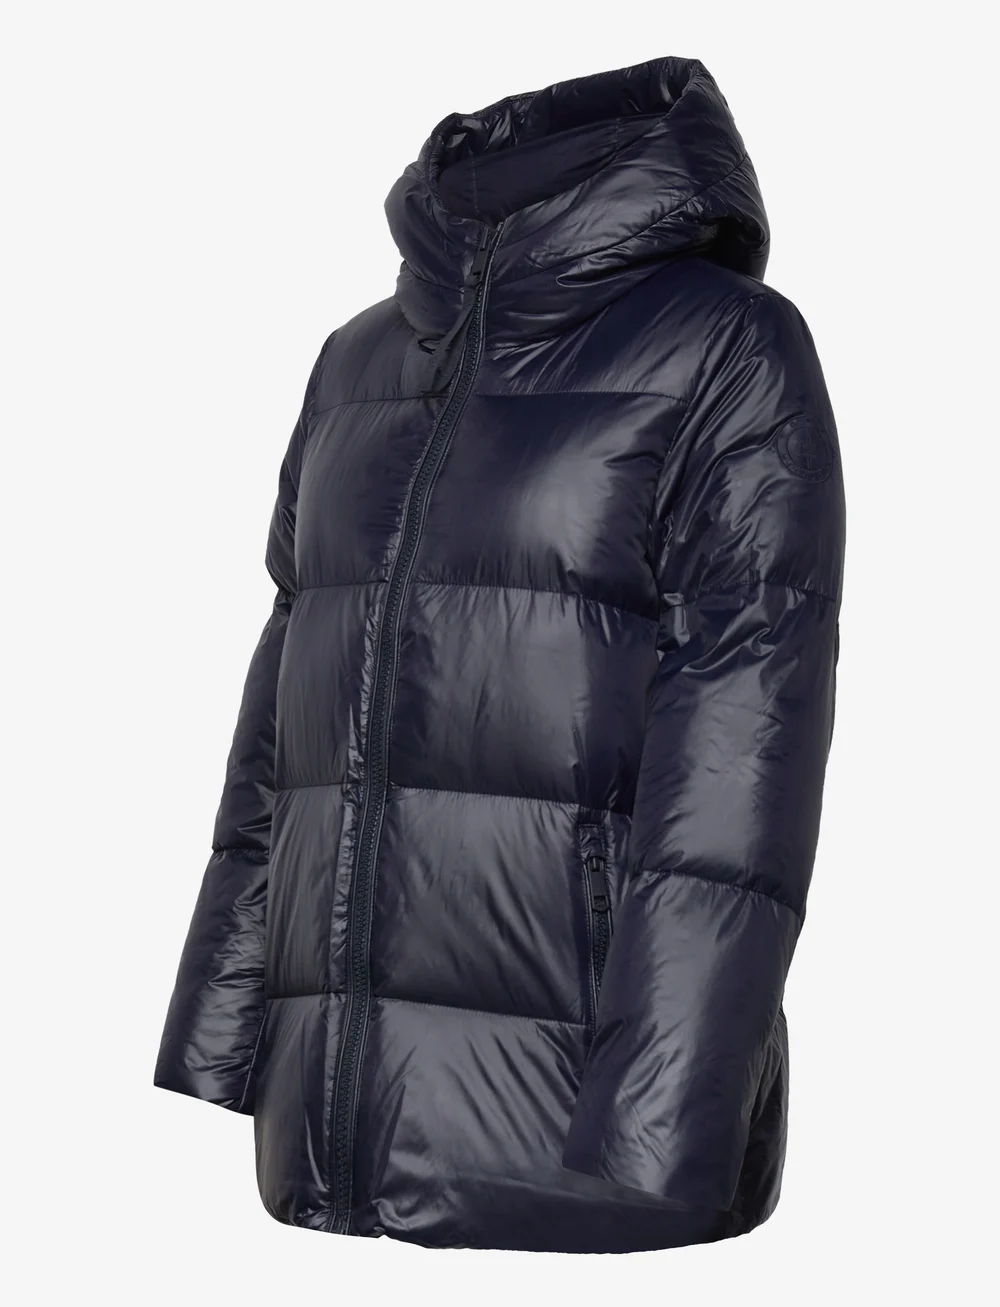 Tommy Hilfiger Sorona Padded Logo Coat - 349.90 €. Buy Down- & padded  jackets from Tommy Hilfiger online at Boozt.com. Fast delivery and easy  returns